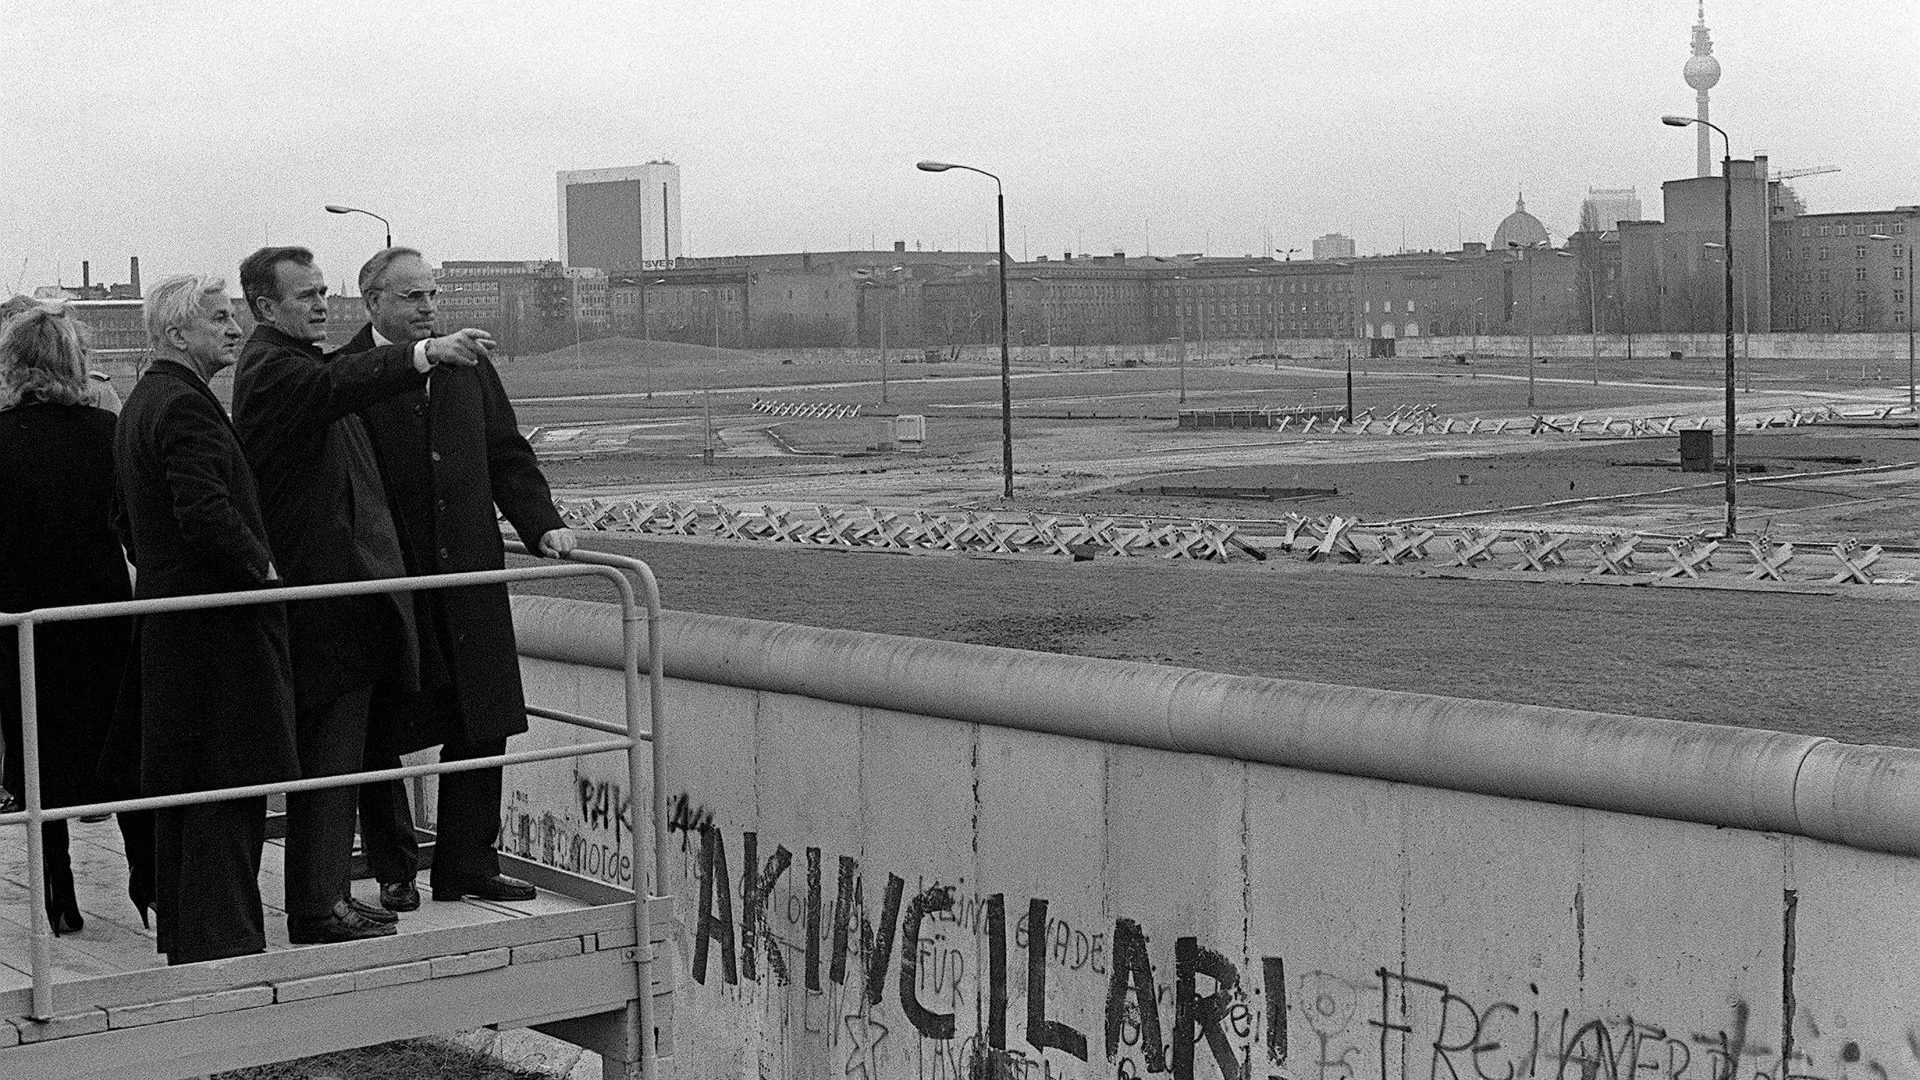 US vice-president George HW Bush looks over the Berlin Wall into East Berlin, escorted by the German chancellor, Helmut Kohl. Photo: HUM Images/Universal/Getty